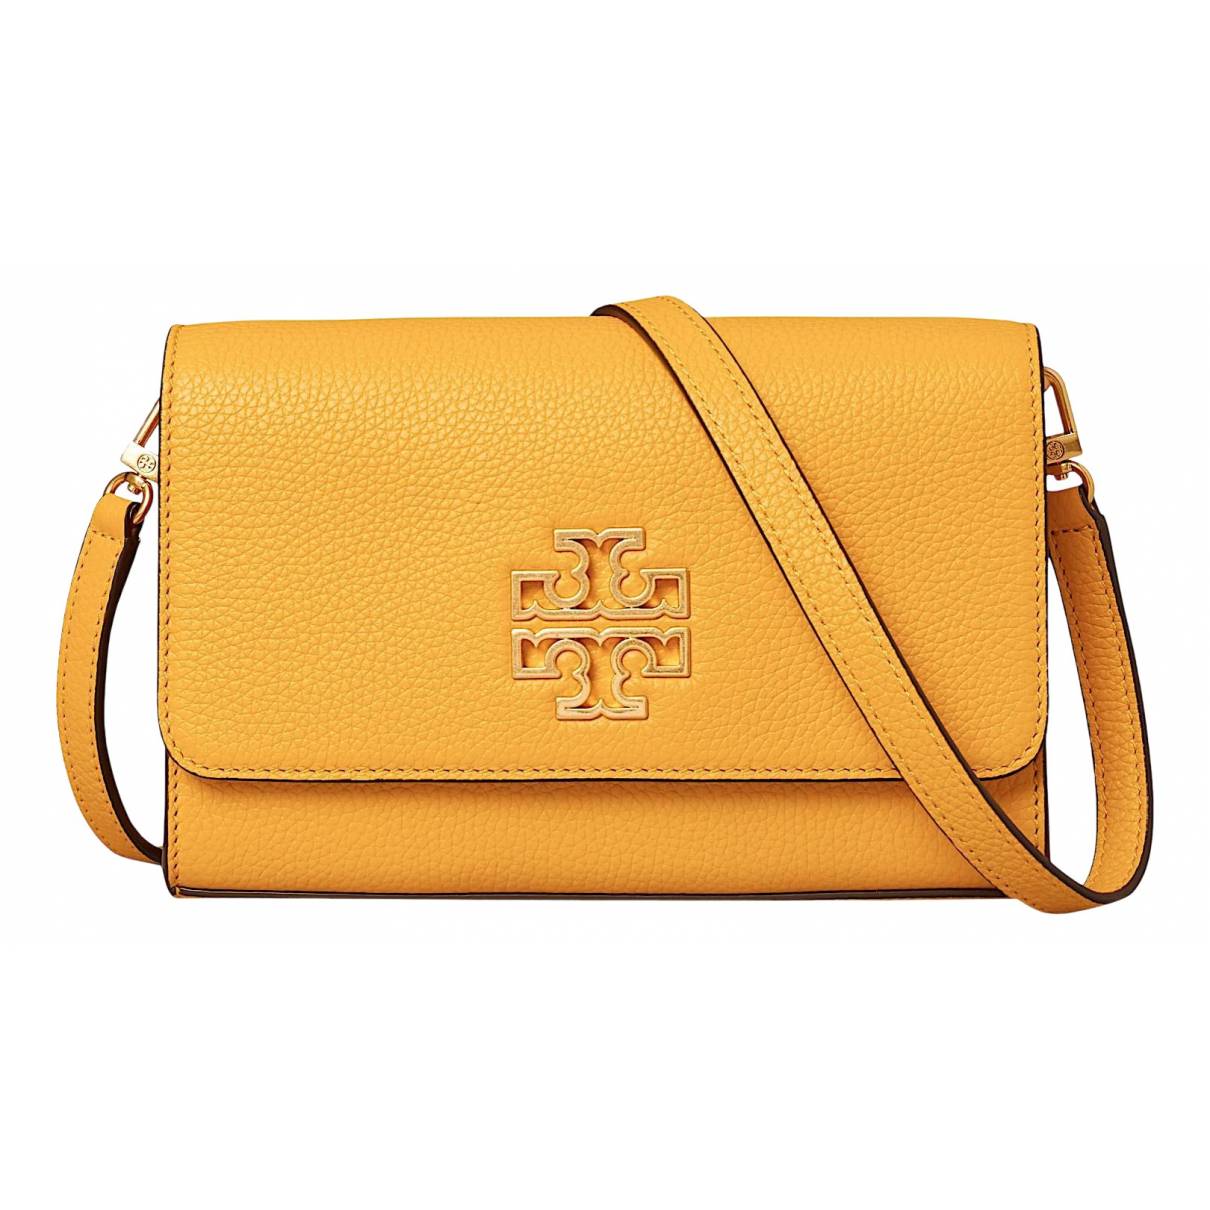 Leather crossbody bag Tory Burch Yellow in Leather - 24976105